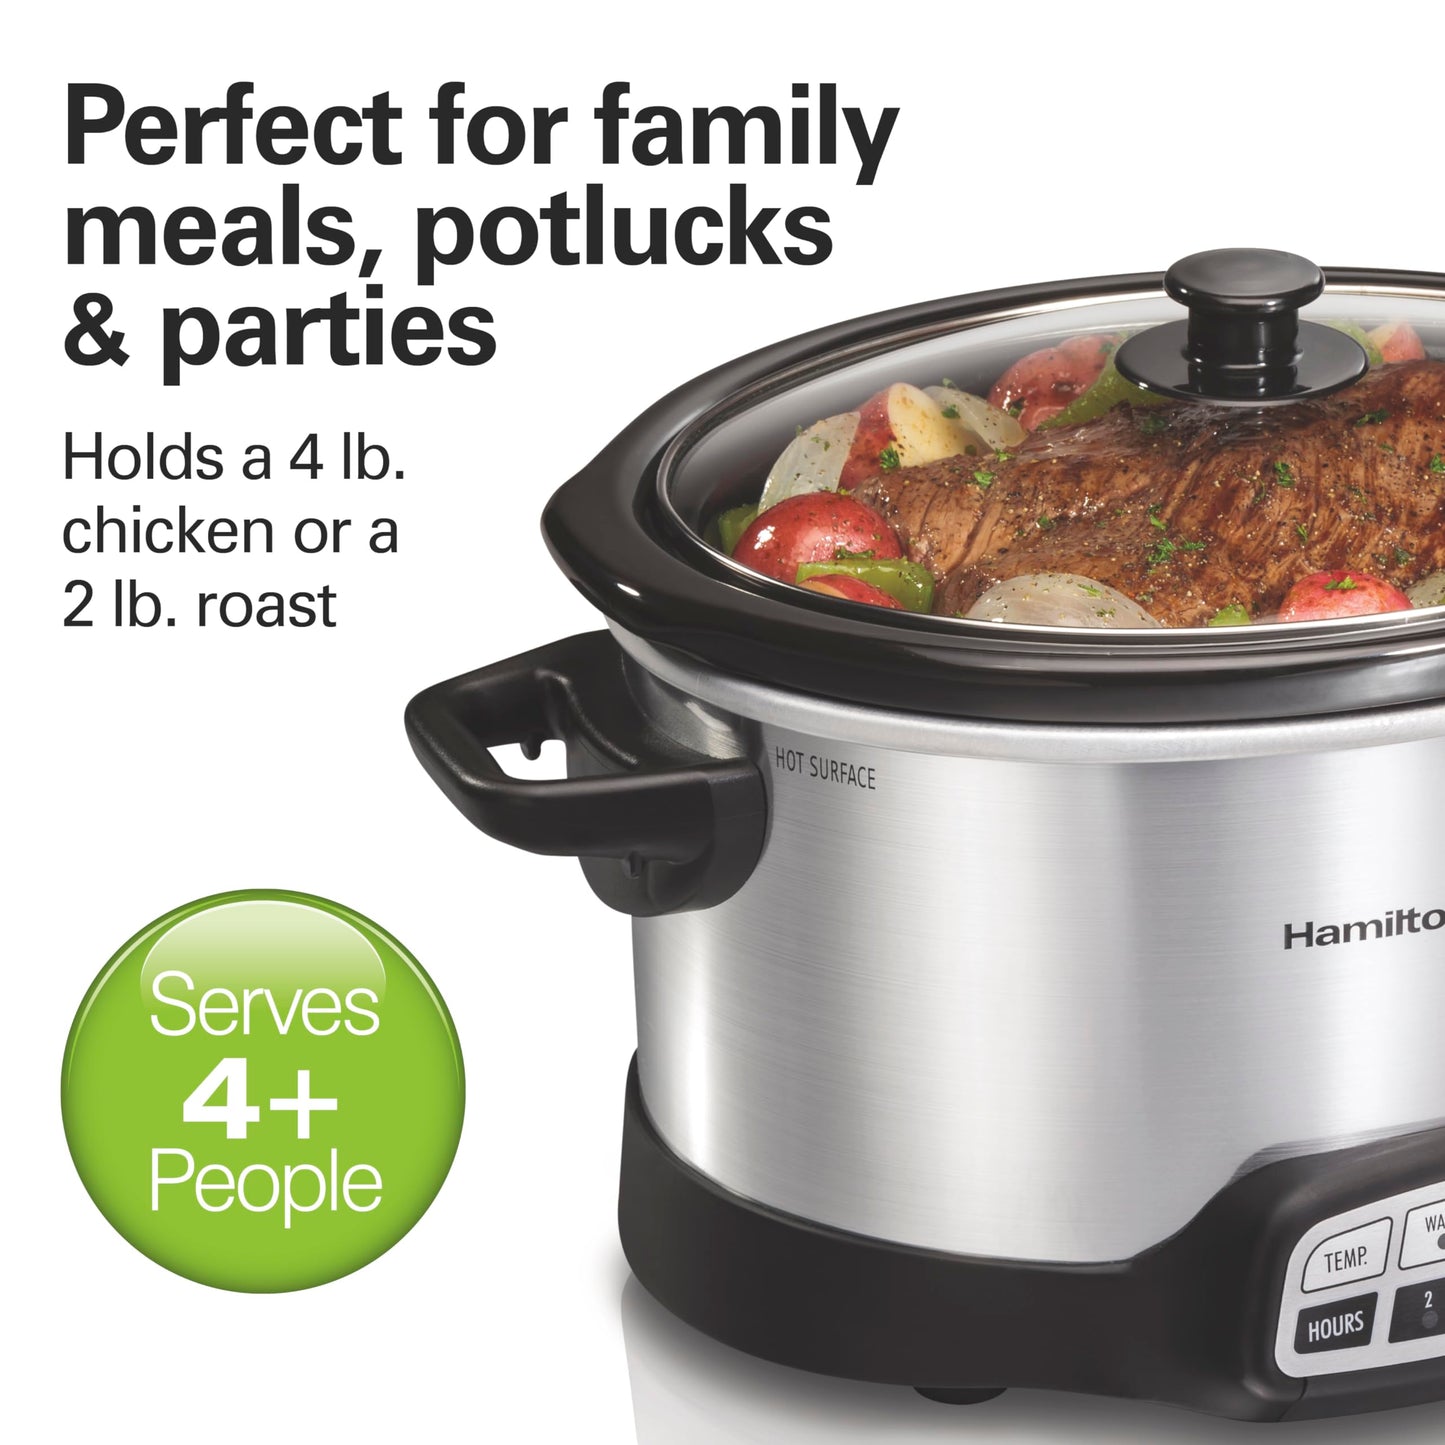 Hamilton Beach Programmable Slow Cooker with Flexible Easy Programming, 5 Cooking Times, Dishwasher-Safe Crock, Lid, 4 Quart, Silver